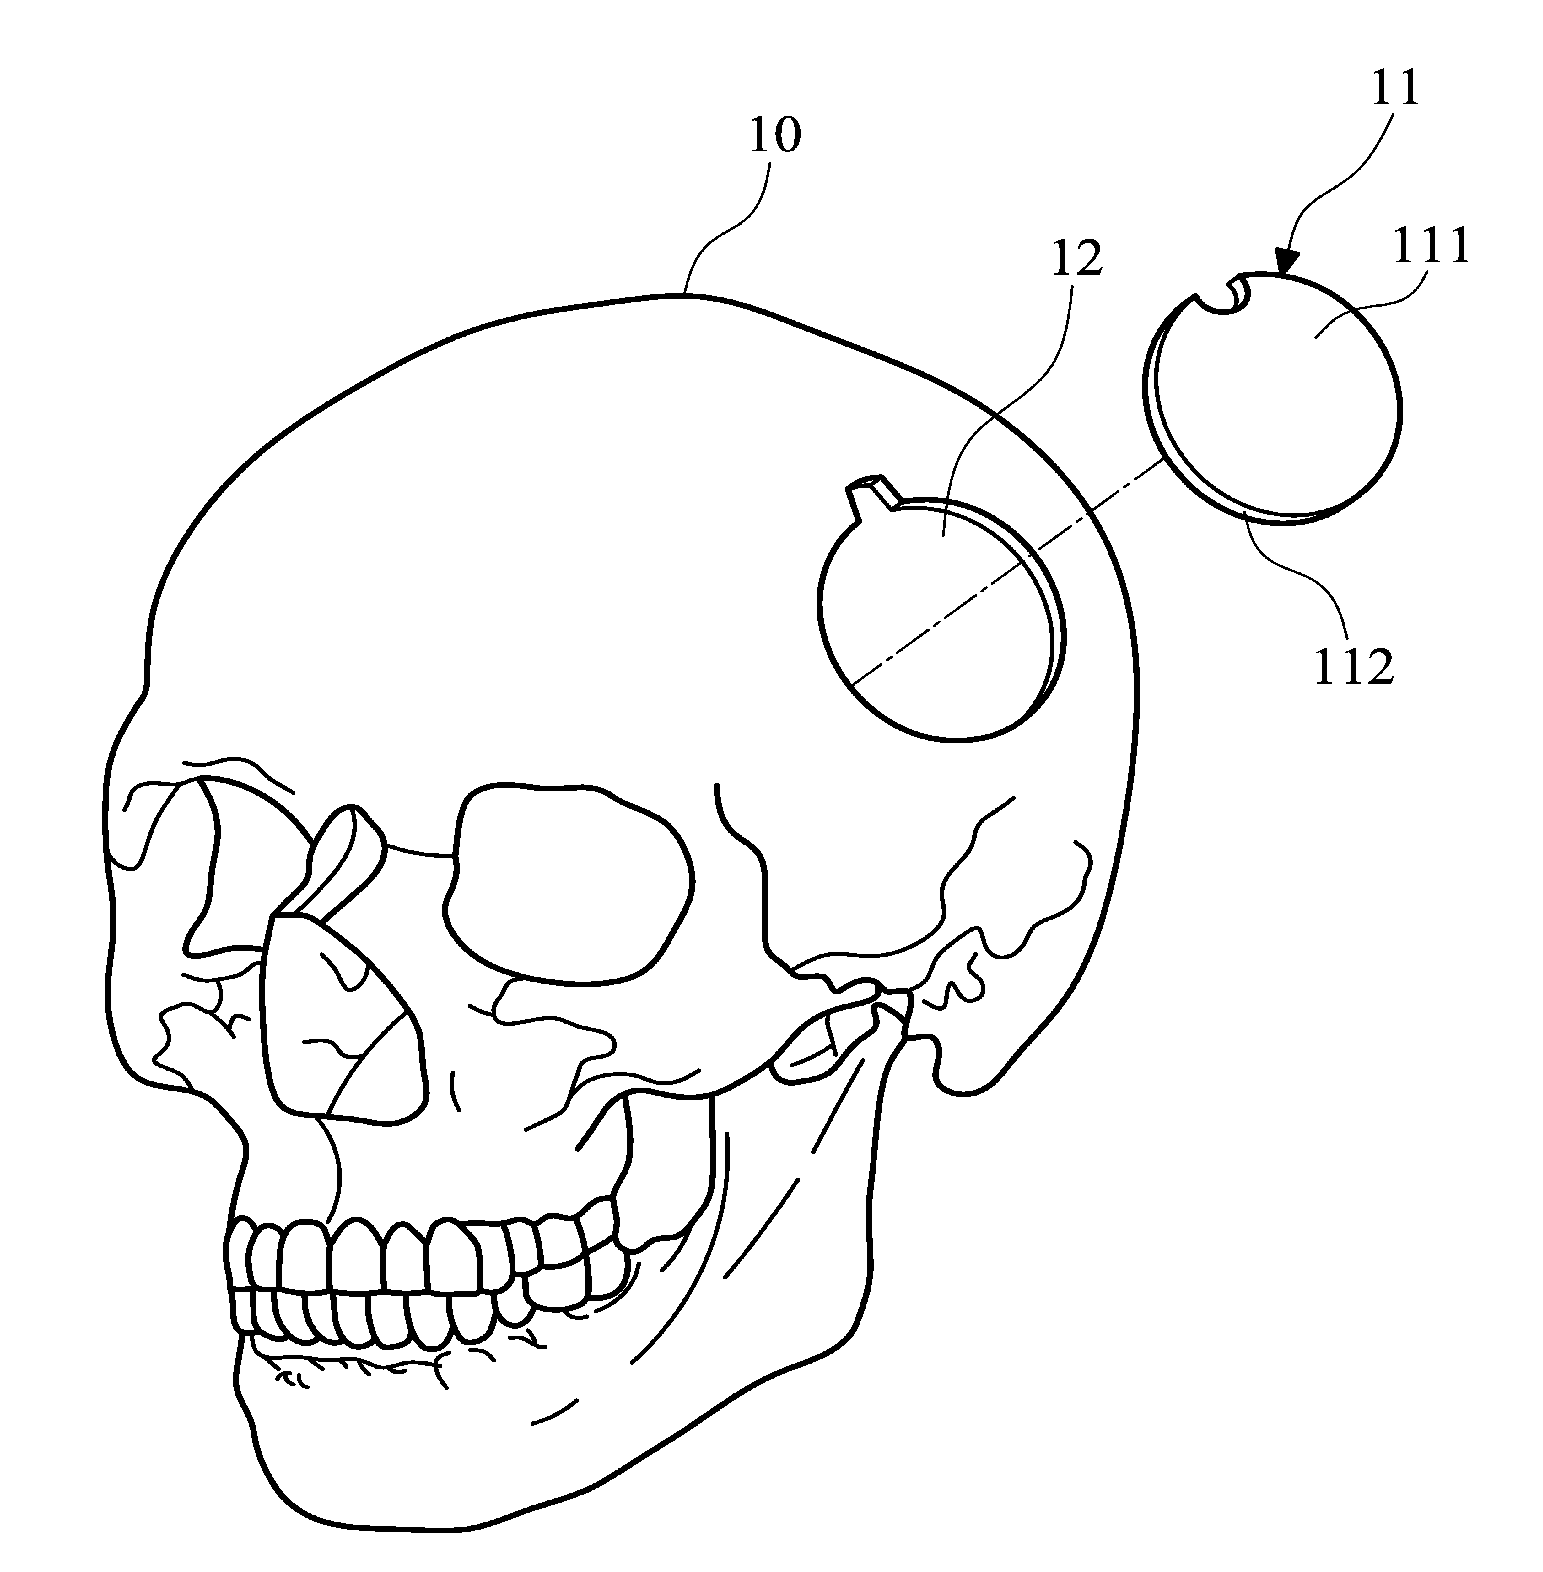 Artificial dura biomedical device and brain surgery method utilizing the same